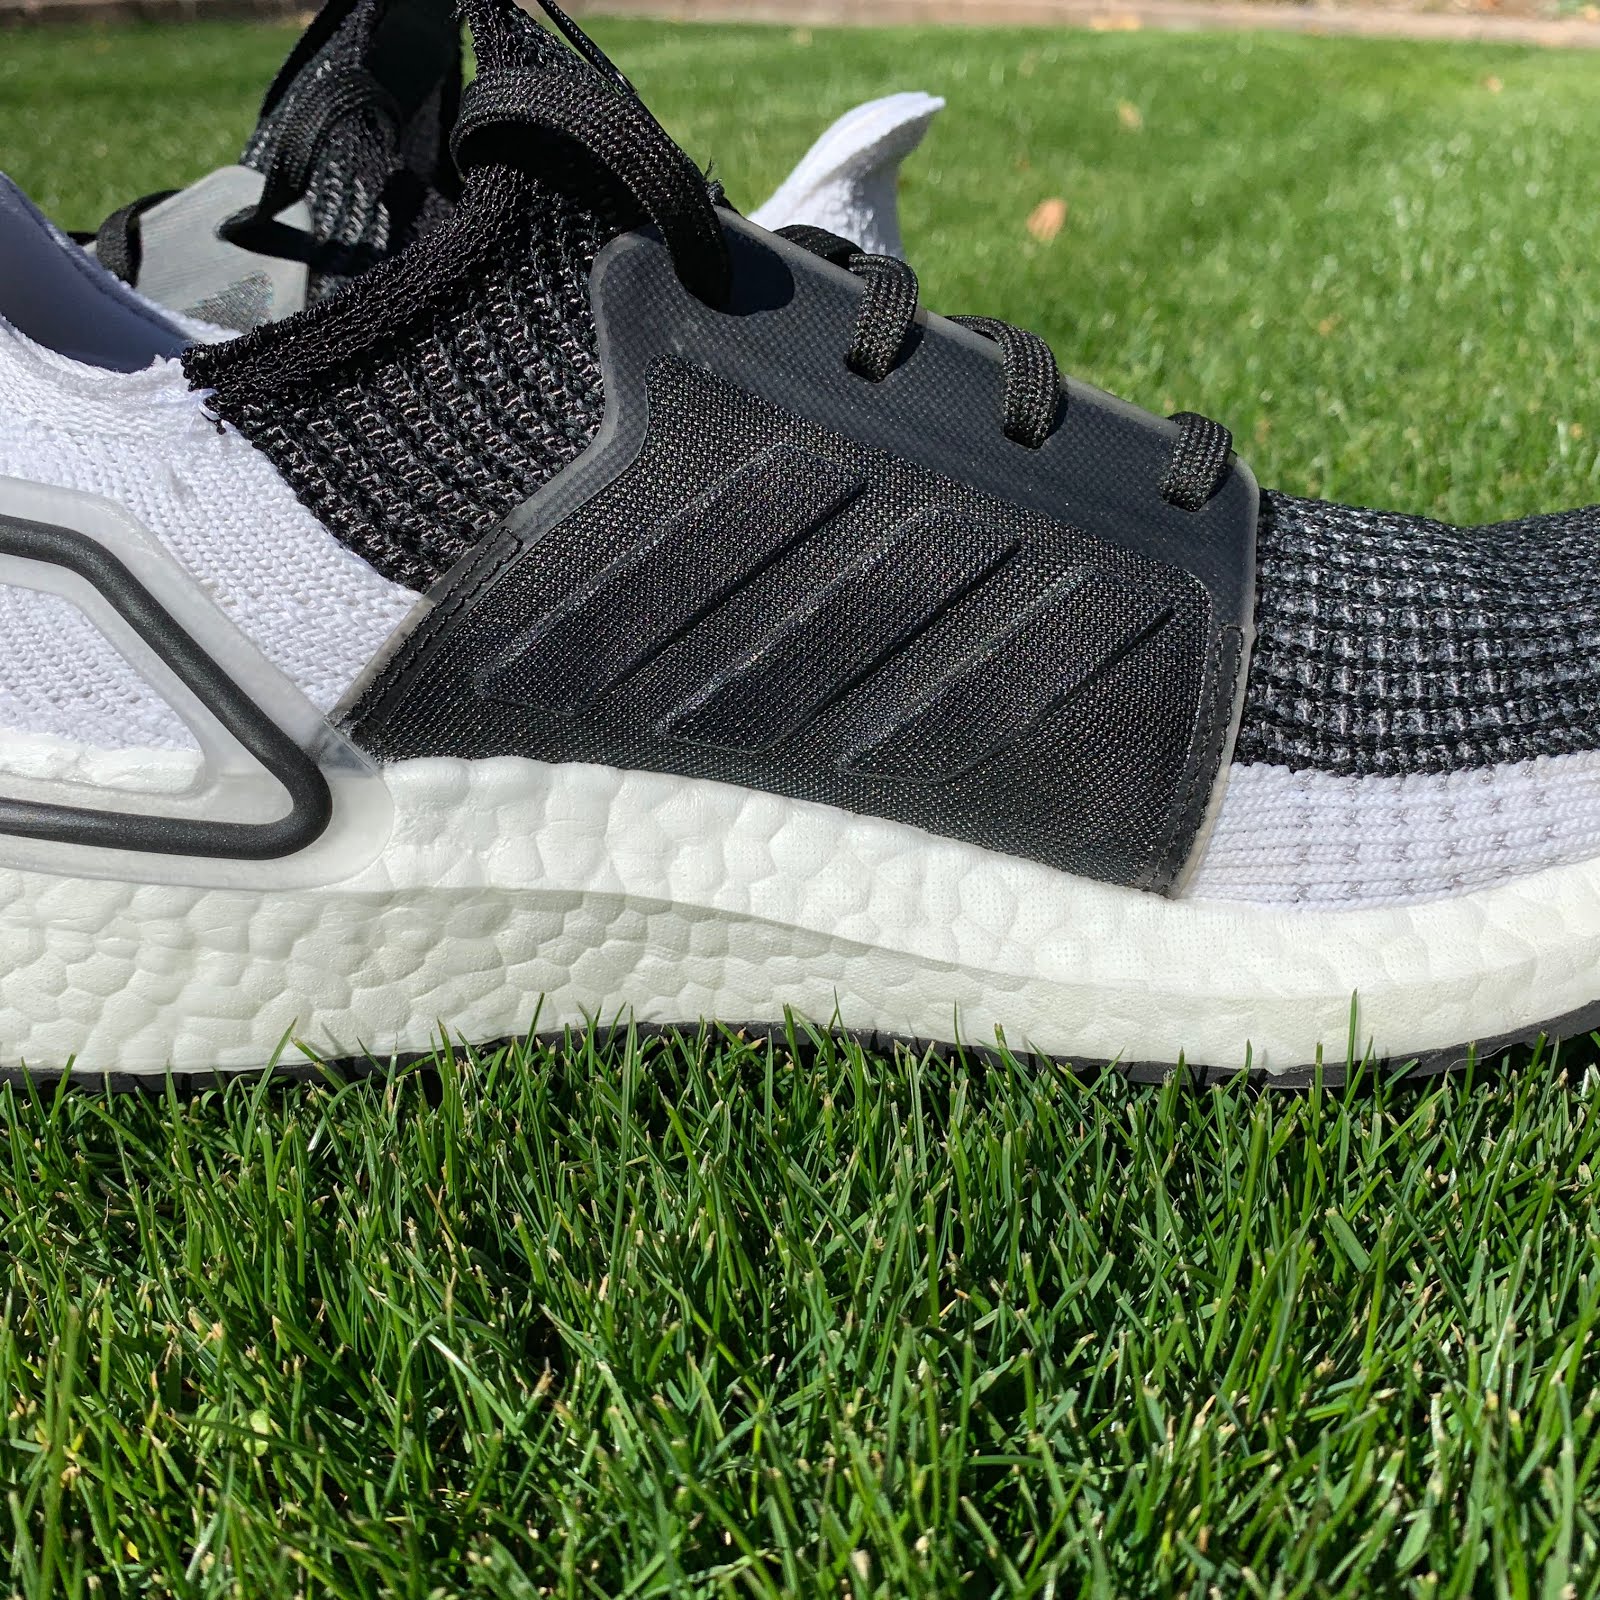 Road Trail Run: adidas Ultra Boost 19 Review Virginia, it's finally a real running shoe!